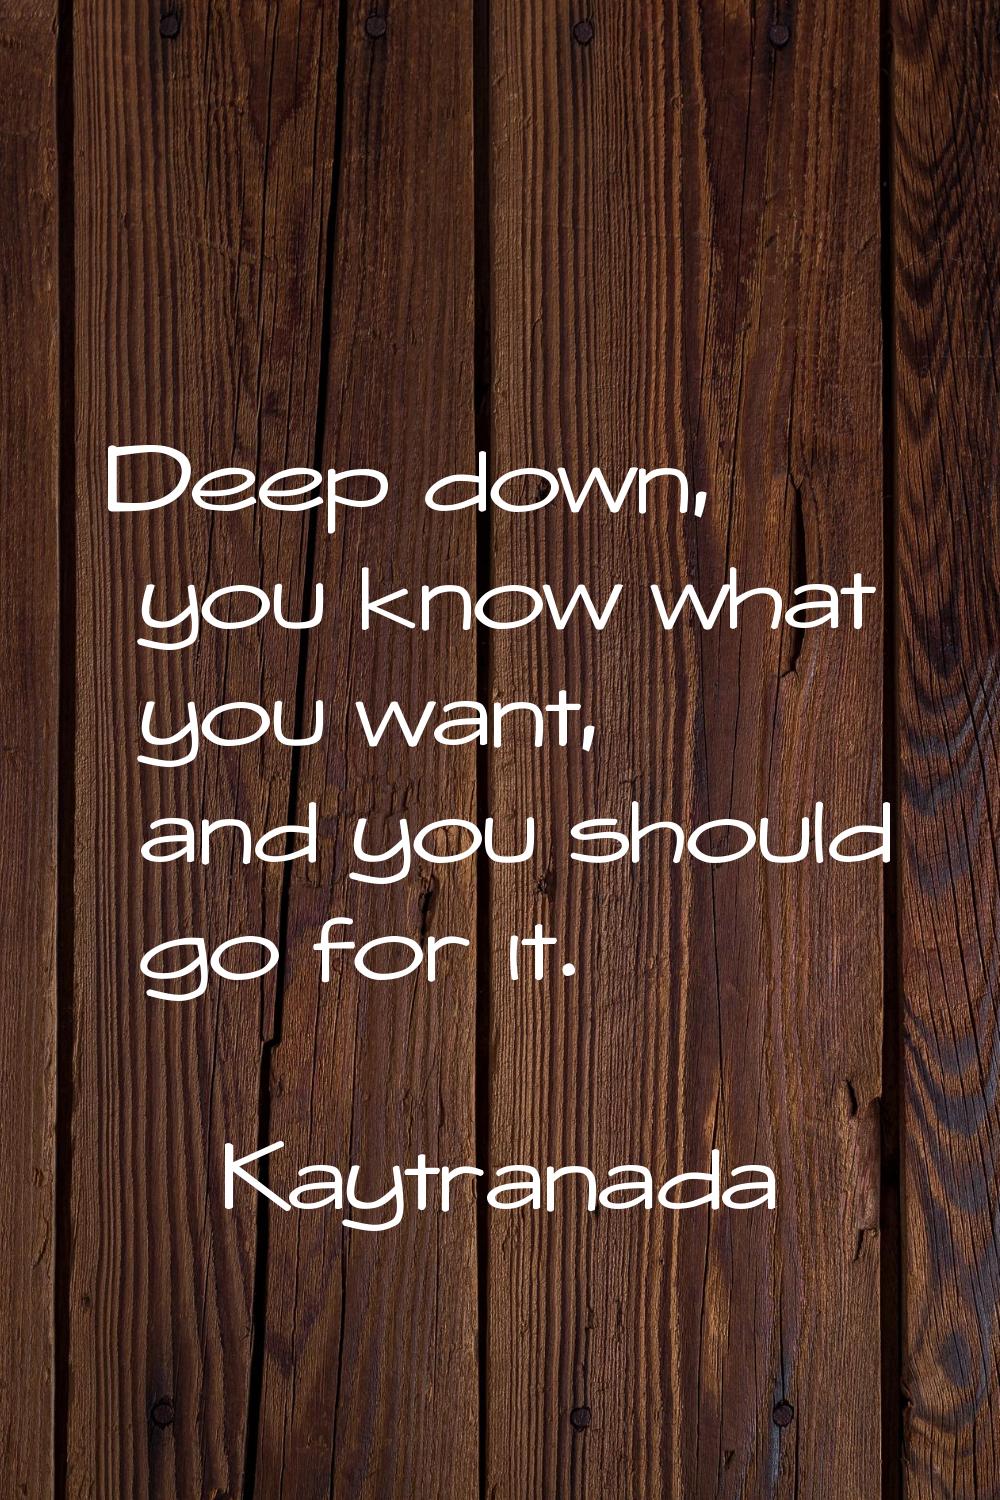 Deep down, you know what you want, and you should go for it.